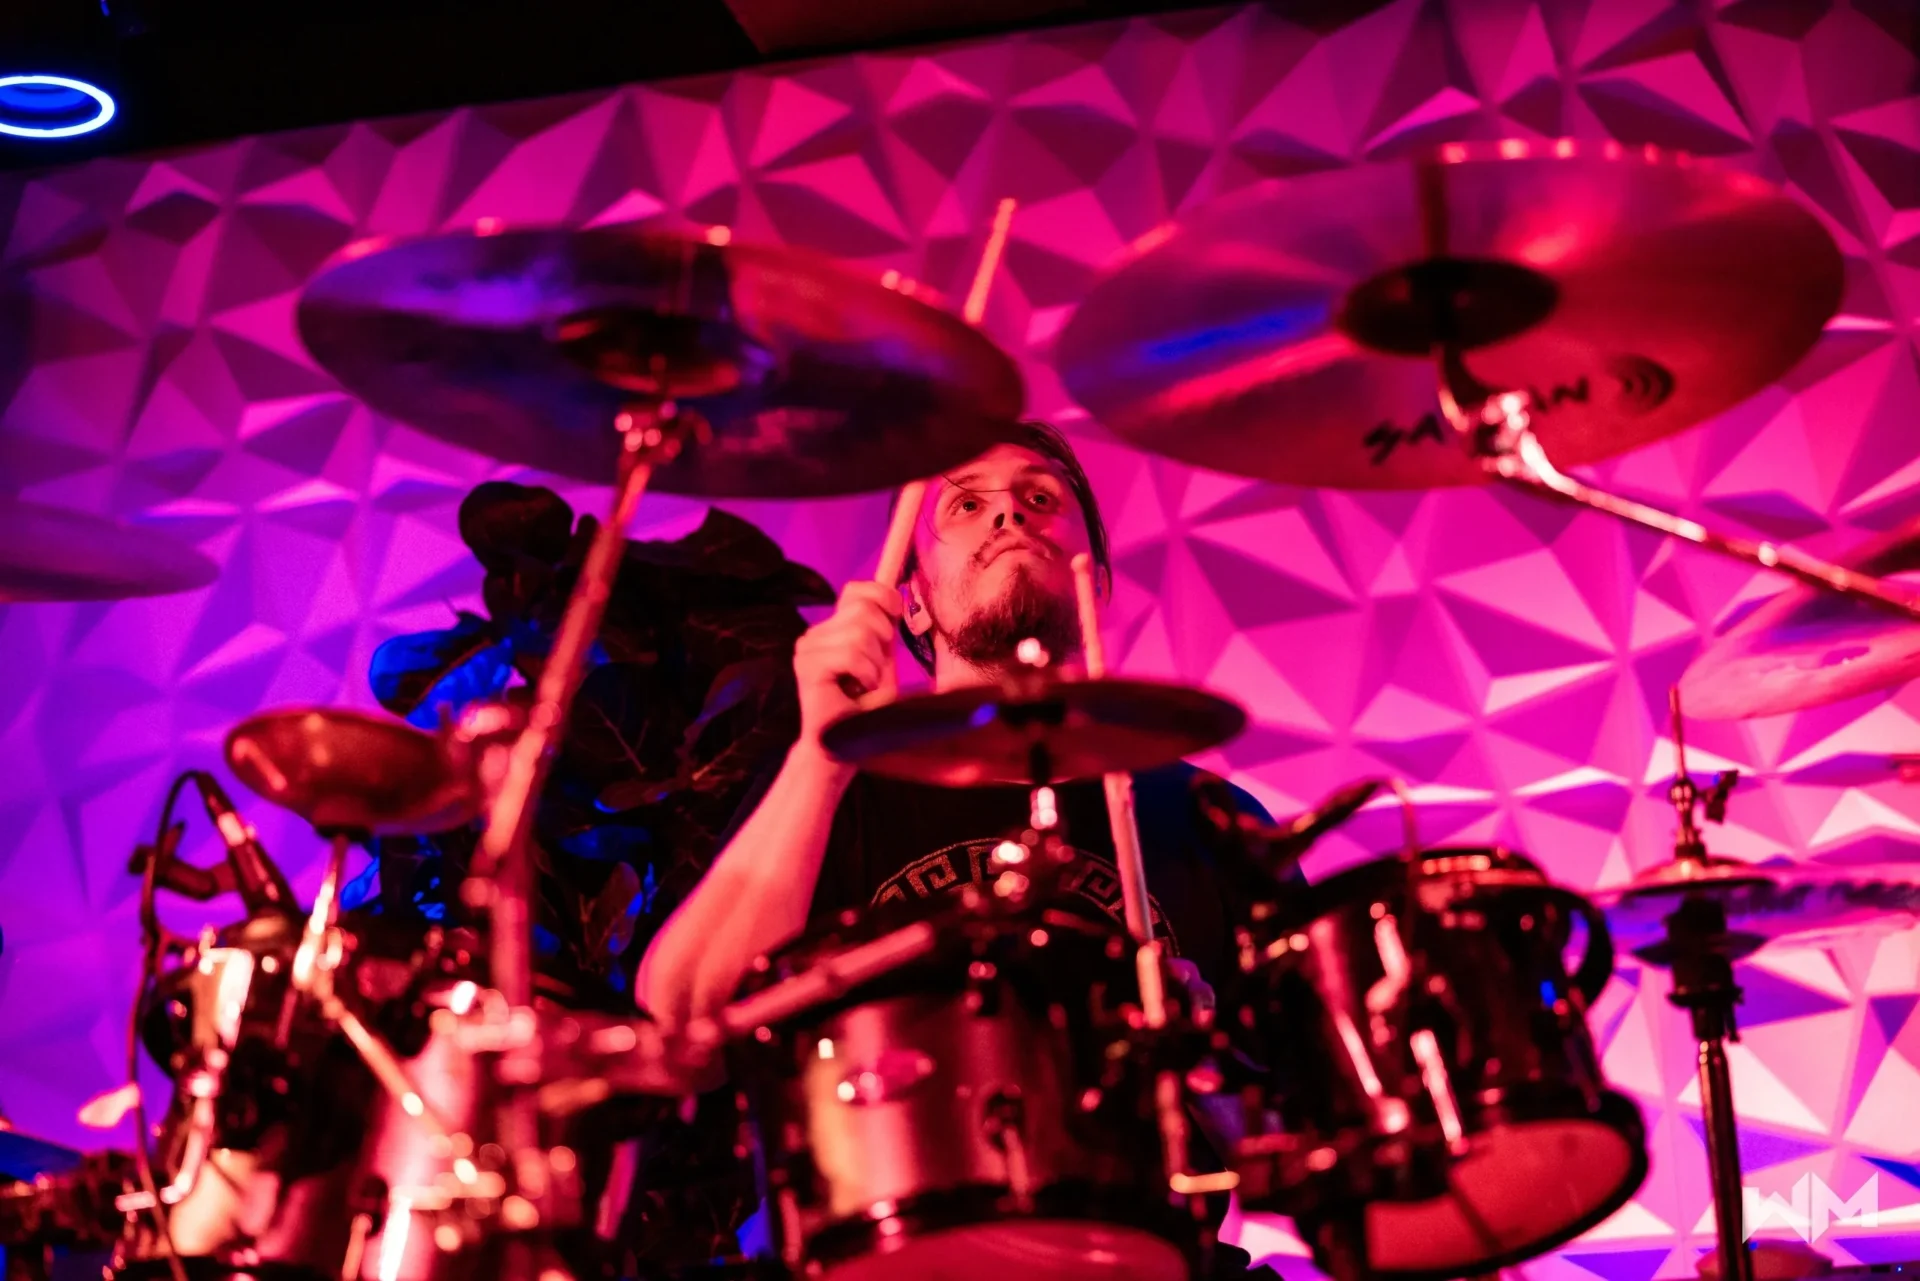 A person playing drums in front of a purple wall.